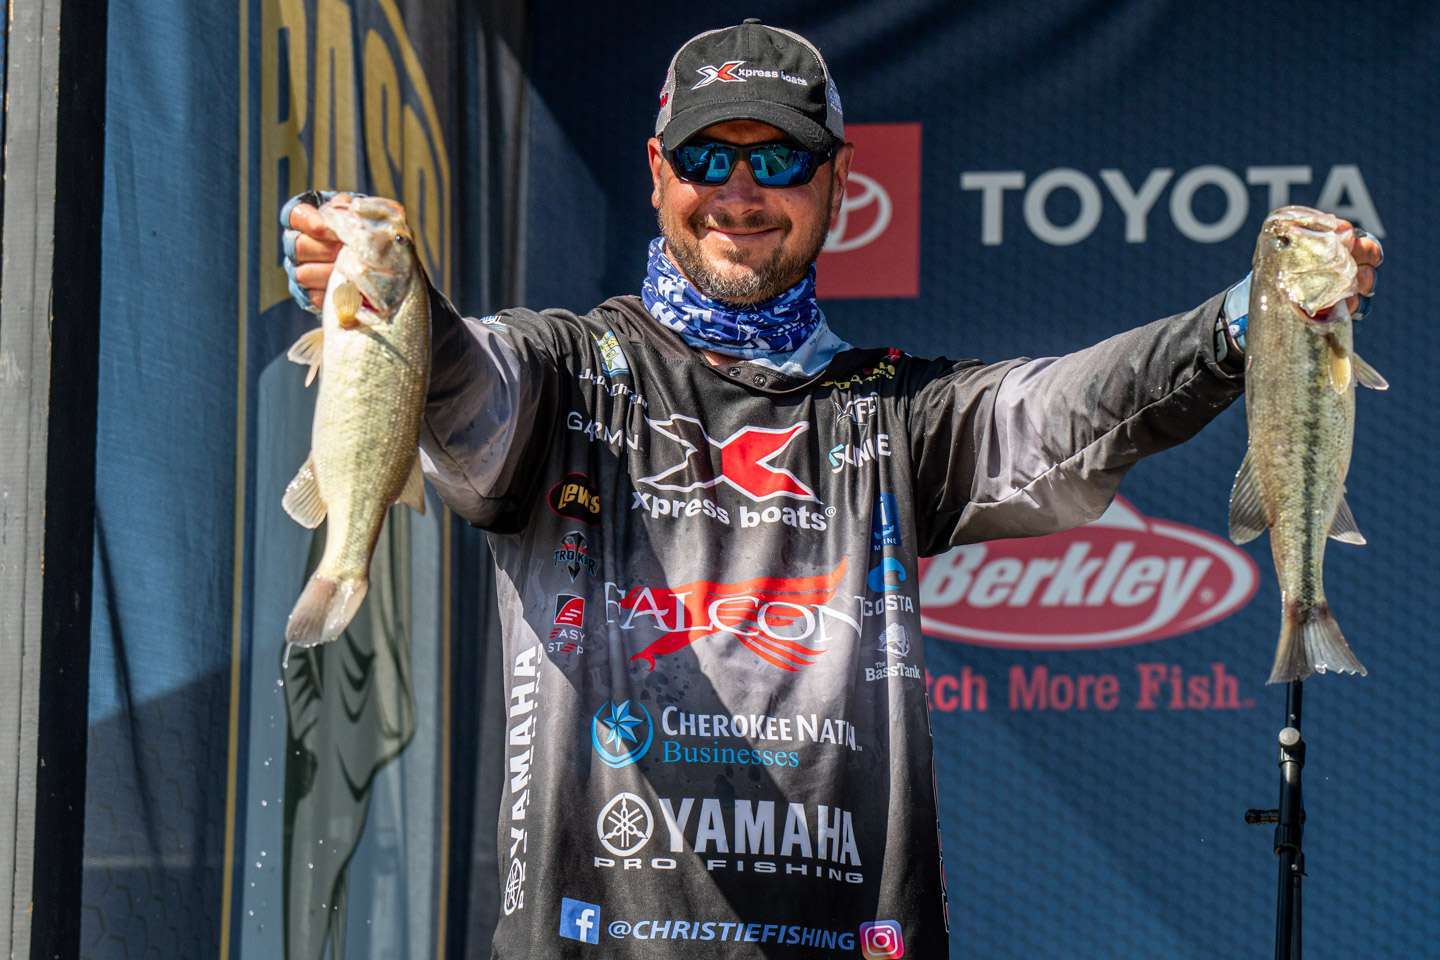 Adjustments were key for Christie, who went farther up Big Cow Creek as he scoured maps Saturday night and discovered steeper banks. The higher water gave him straighter lines and cut his gas consumption, so finding bigger bass was his main concern. Christie went into Championship Sunday leading Mosley by 15 ounces and caught 8-4 to total 43-15 and win by 1-6. 